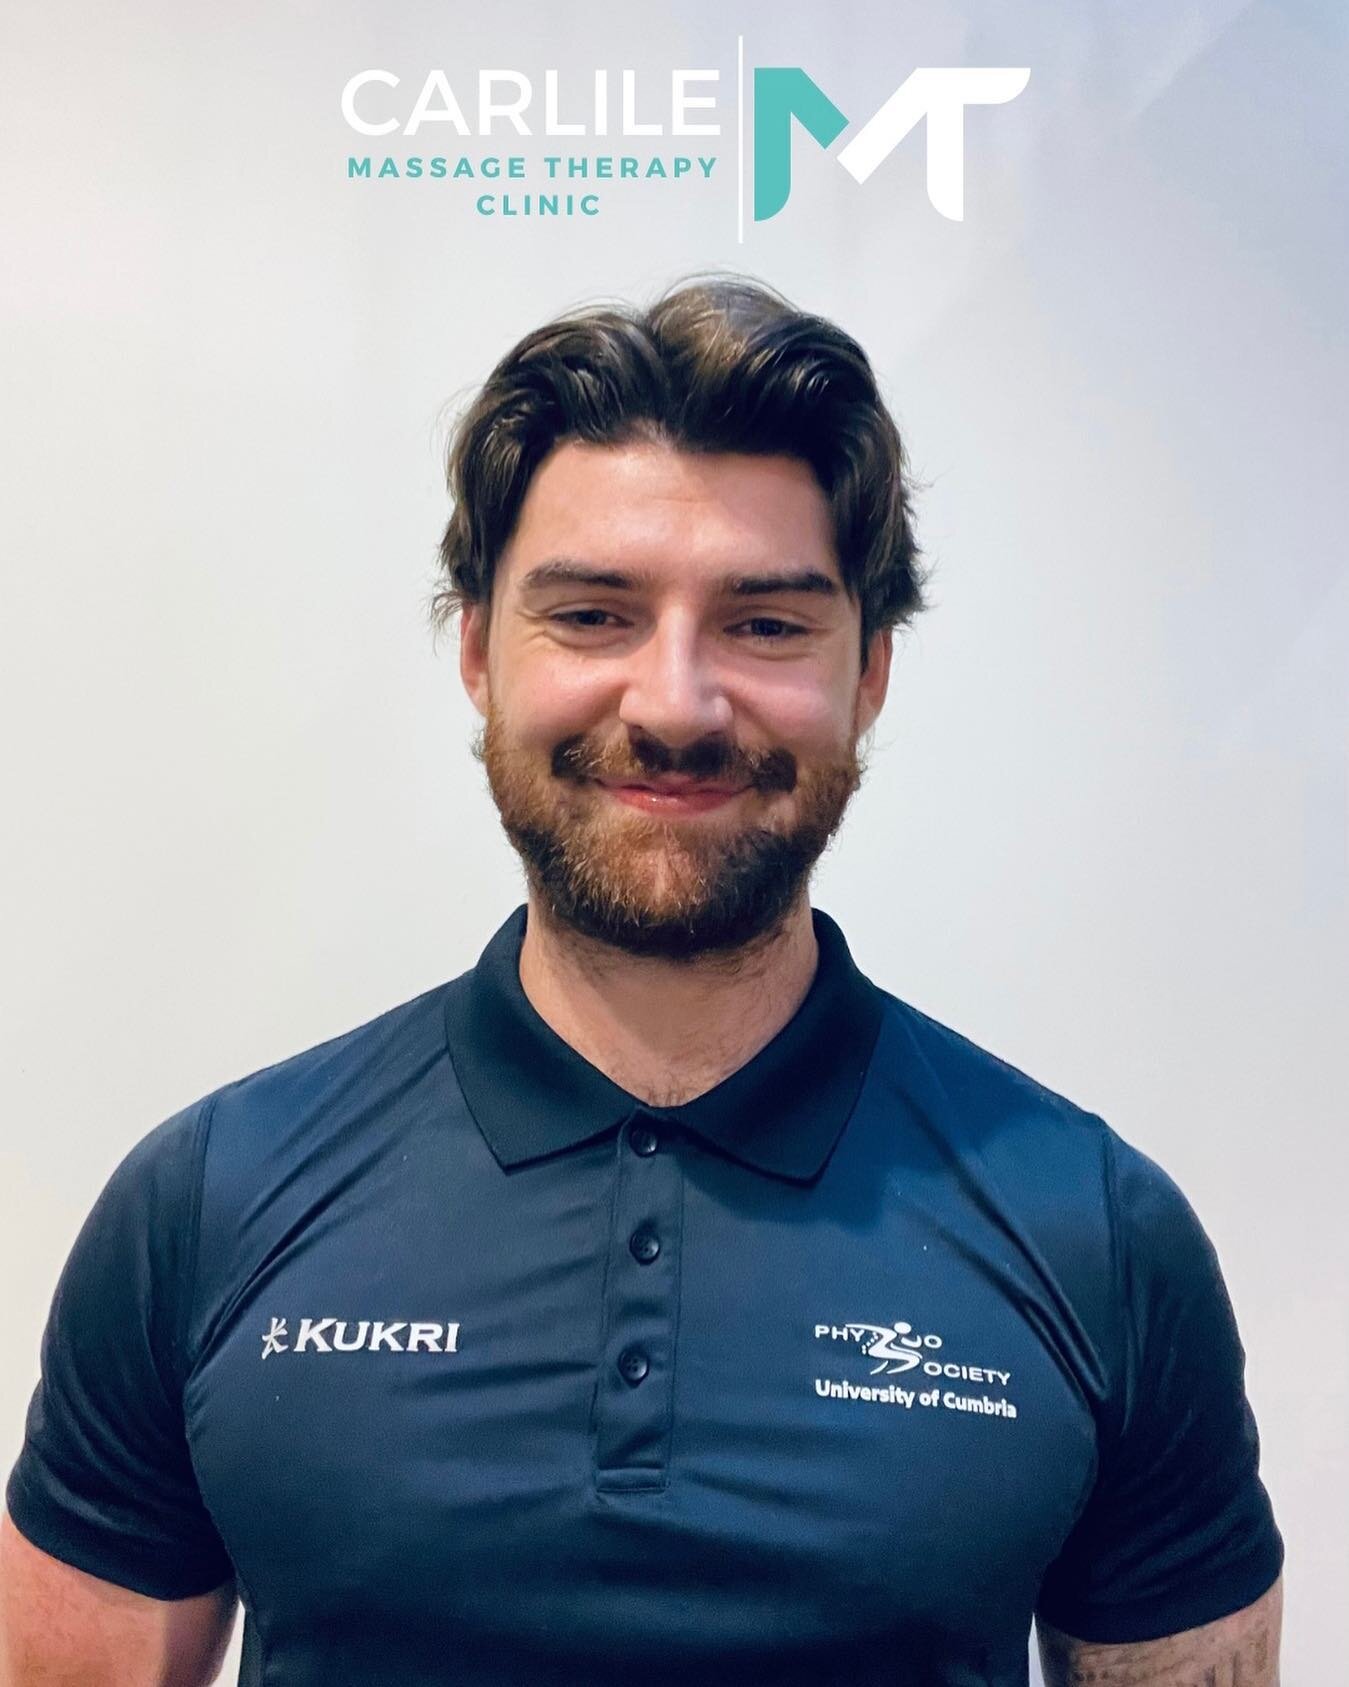 Meet your therapist! 

In addition to his BSc (Hons) in Exercise and Health Science from the University of Limerick, he is currently studying for his MSc in Physiotherapy at the University of Cumbria. 

As well as having 6 years of experience in the 